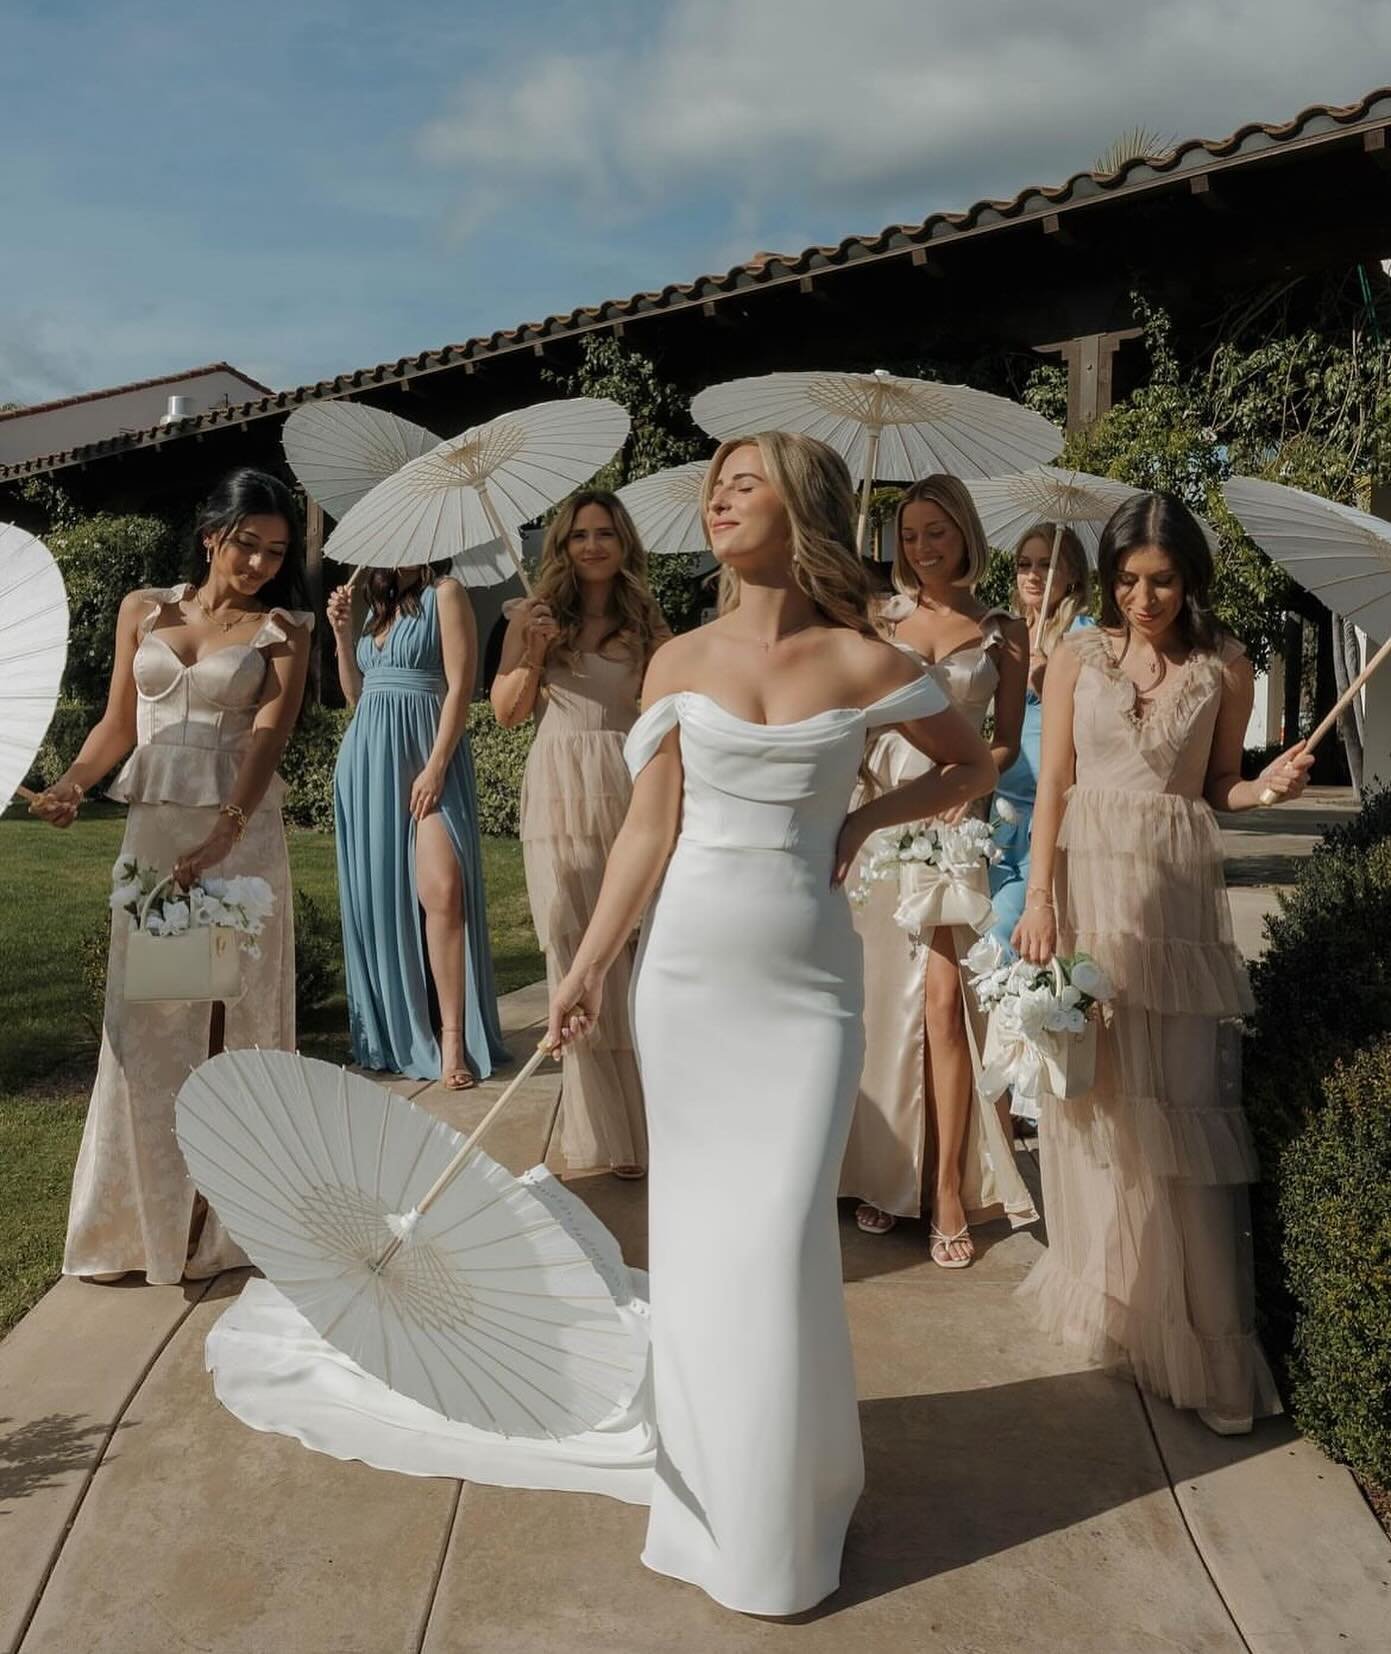 Posing with parasols 101 
Photo @sophiasavagephoto 
Design @events.by.chrissy